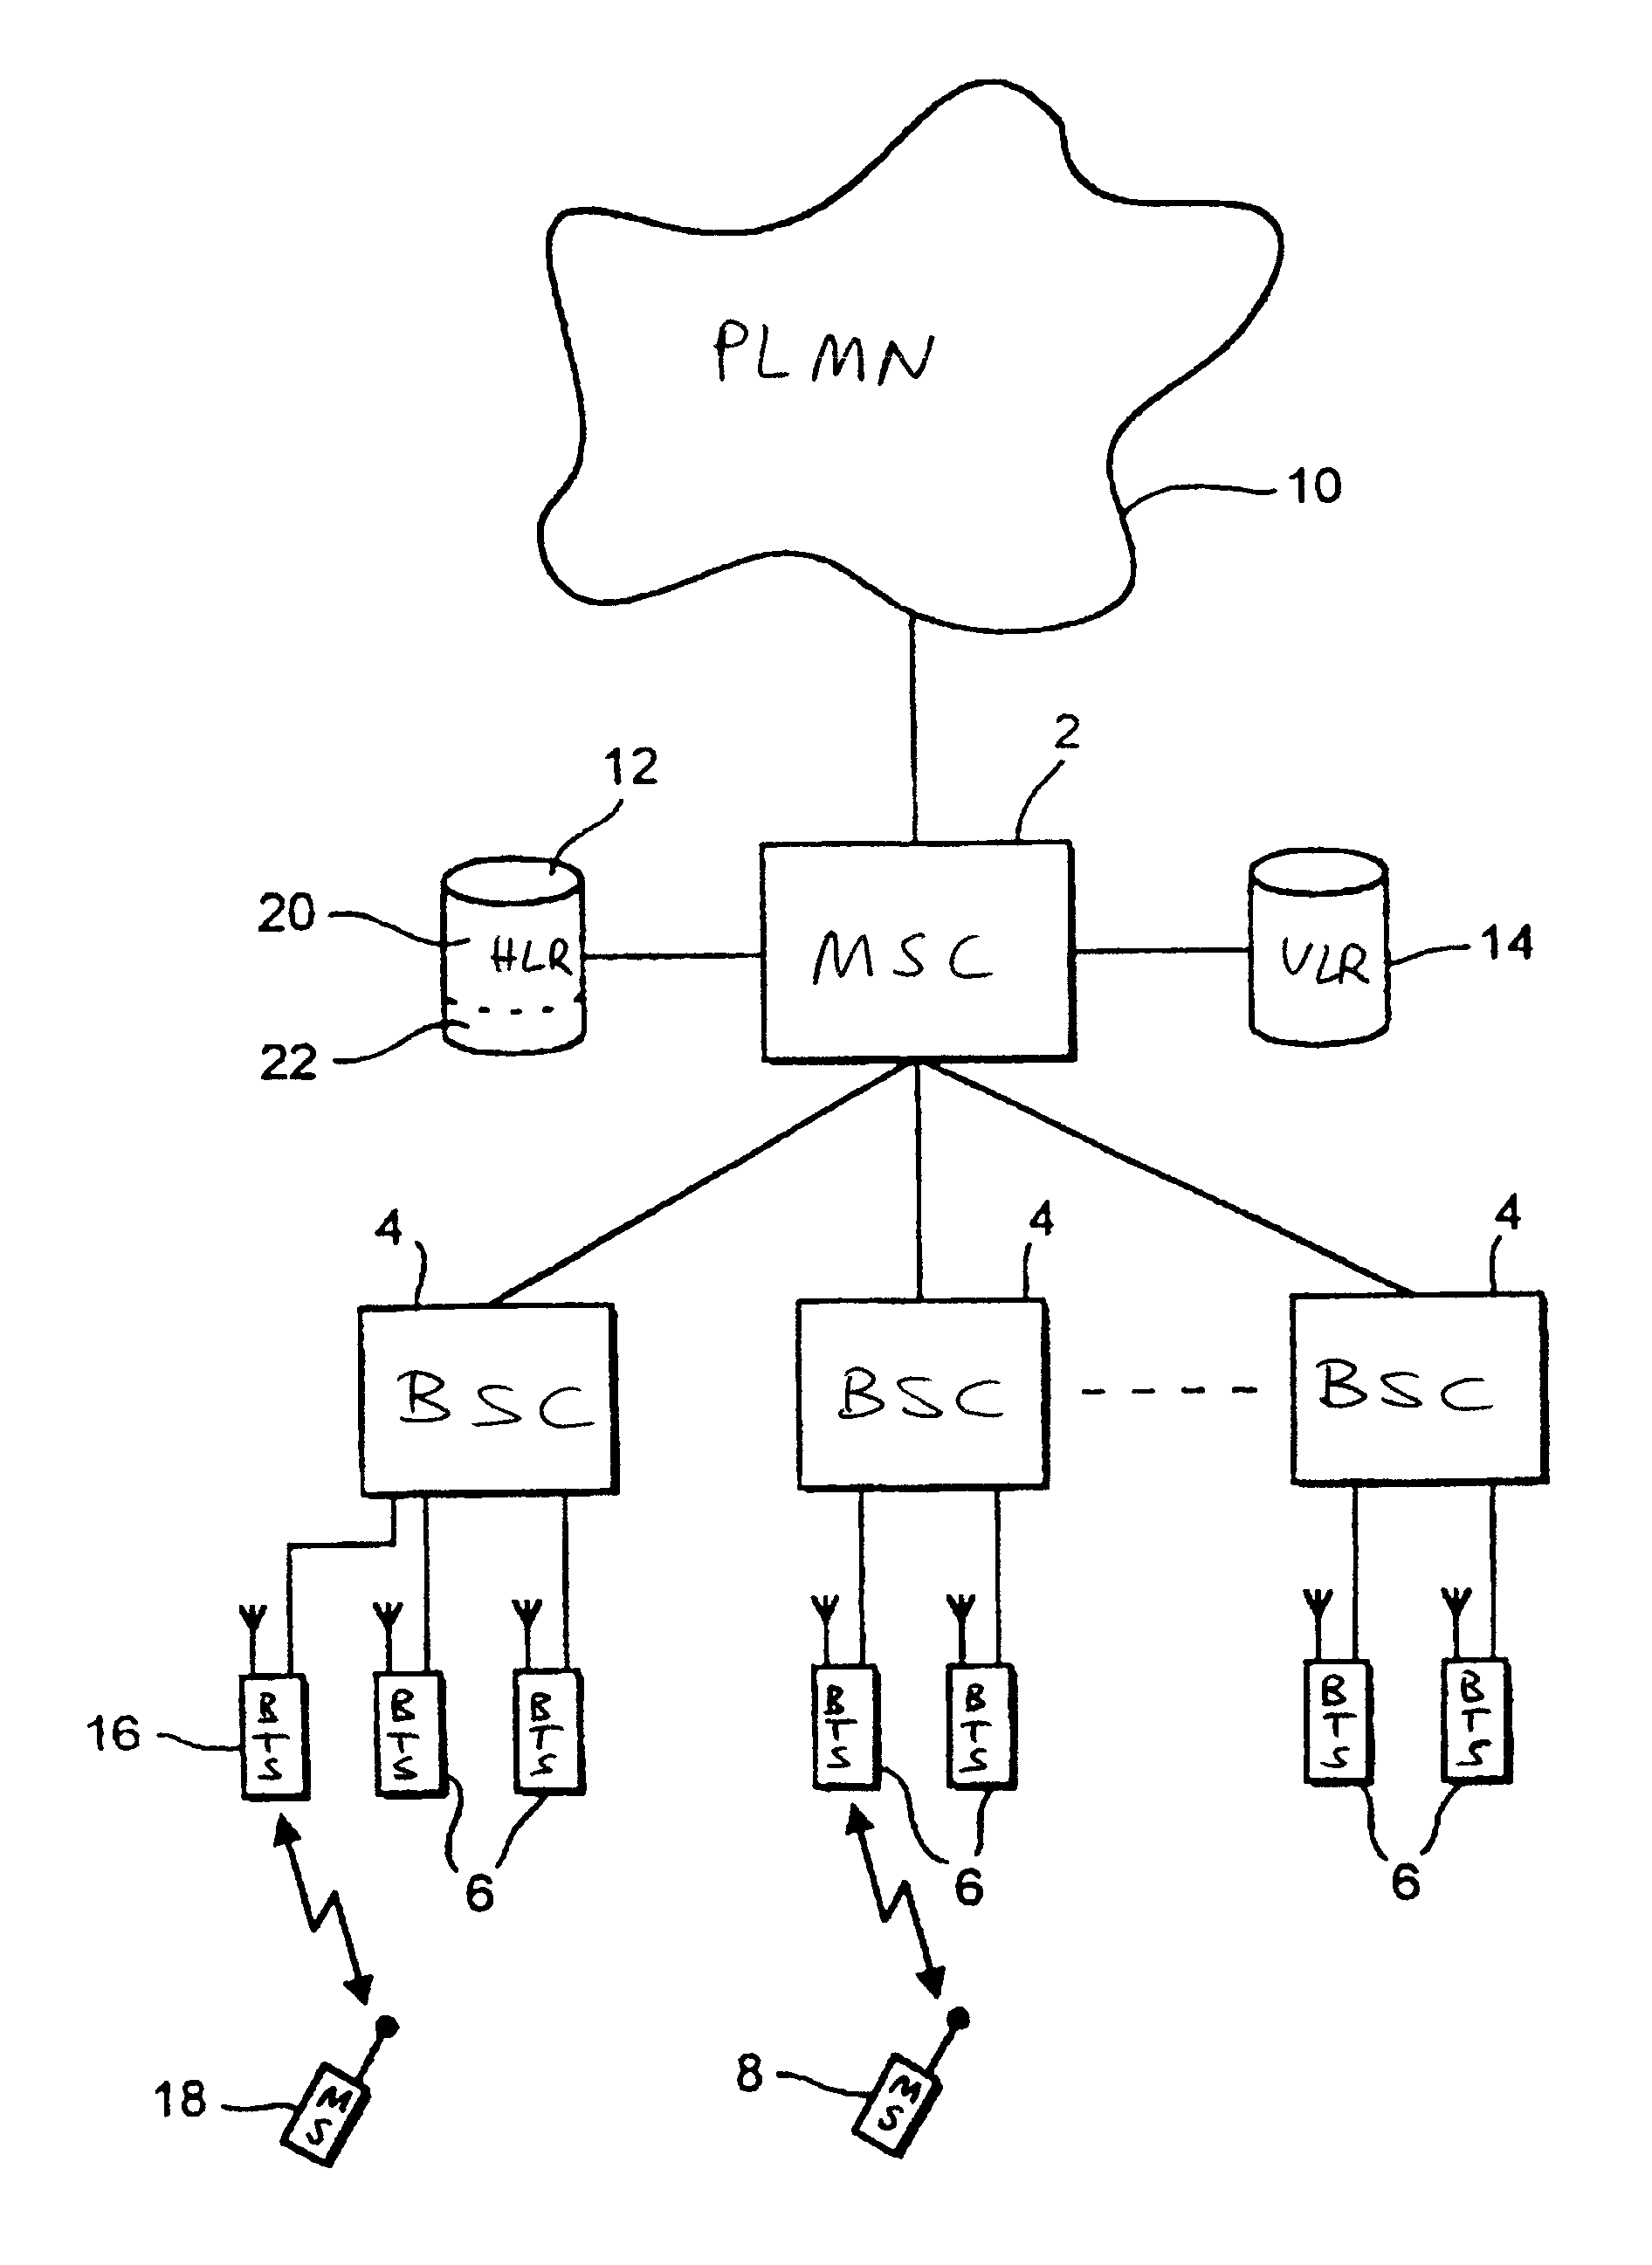 Mobile communications system having a cellular communications network comprising a public network portion and a private network portion using a common radio interface protocol